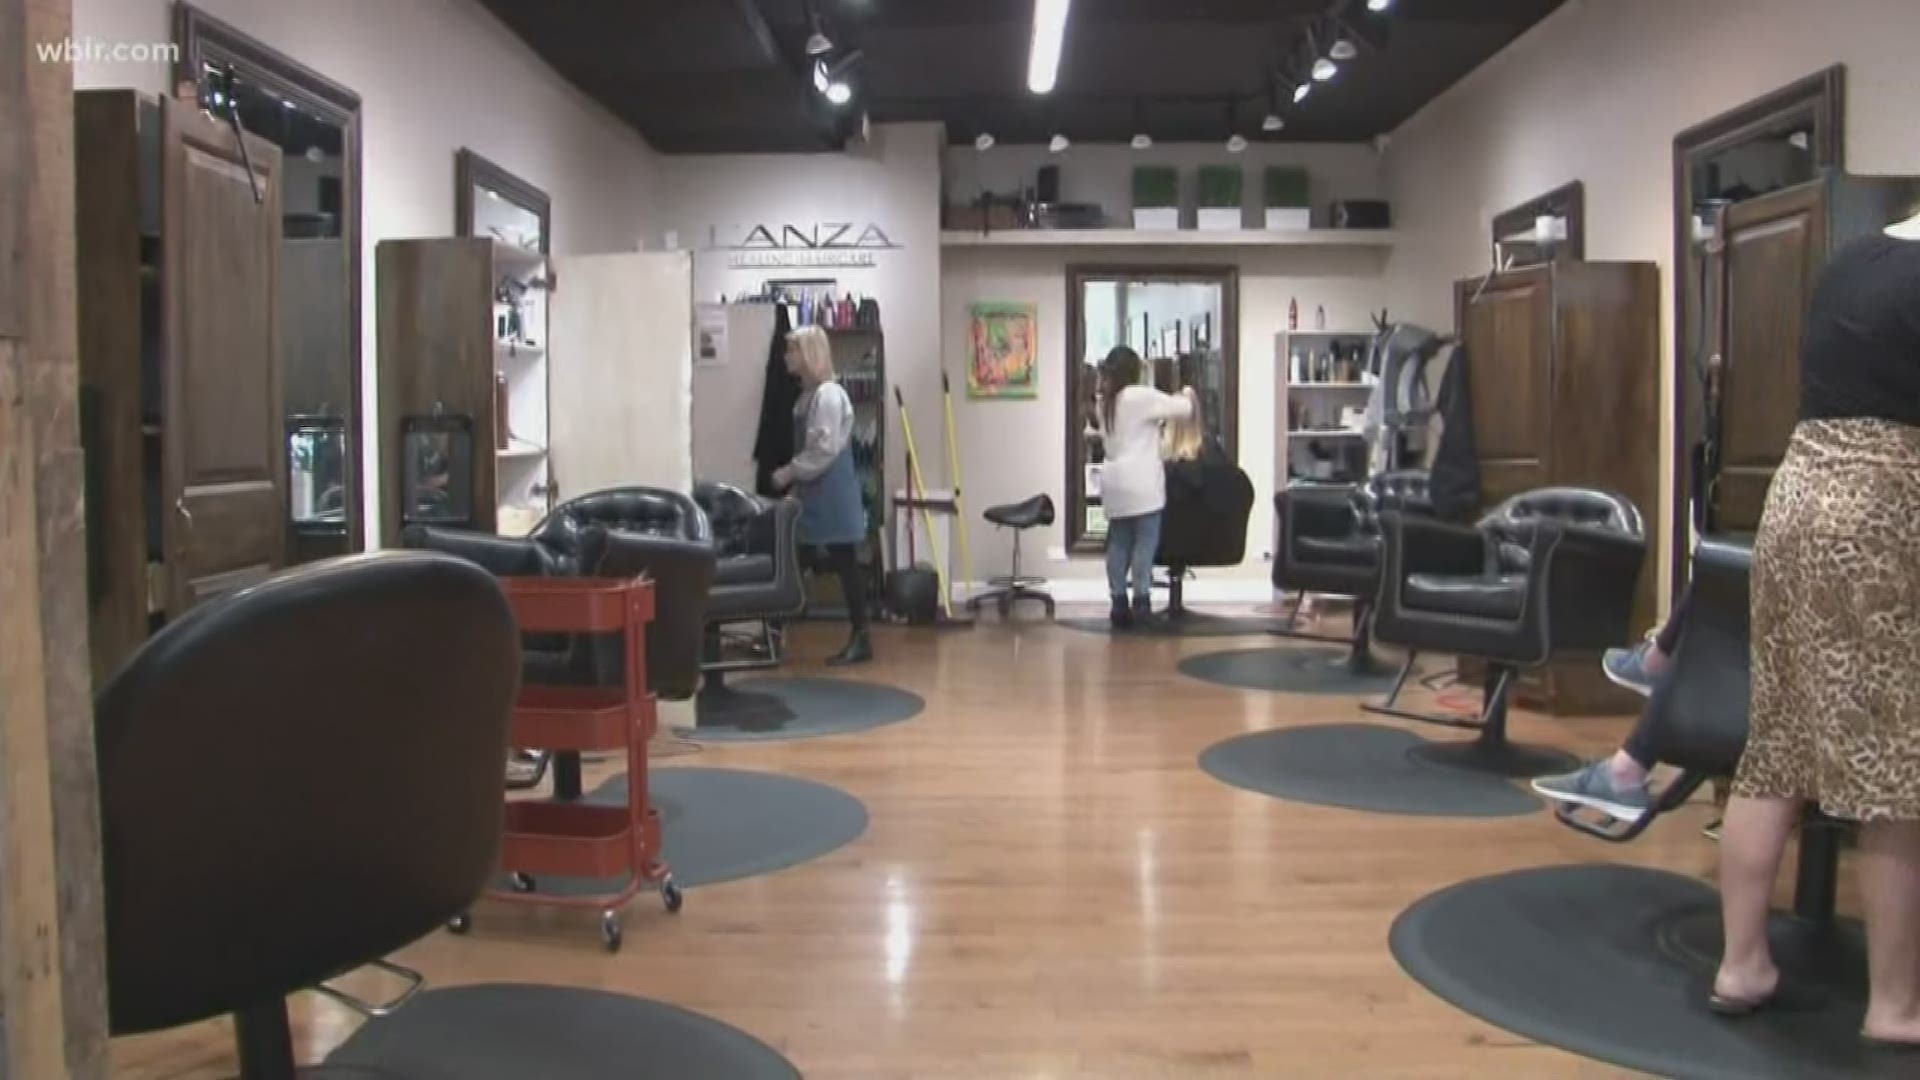 Local and state officials haven't mandated salons to close, so owners are taking matters into their own hands to protect their clients and staff.